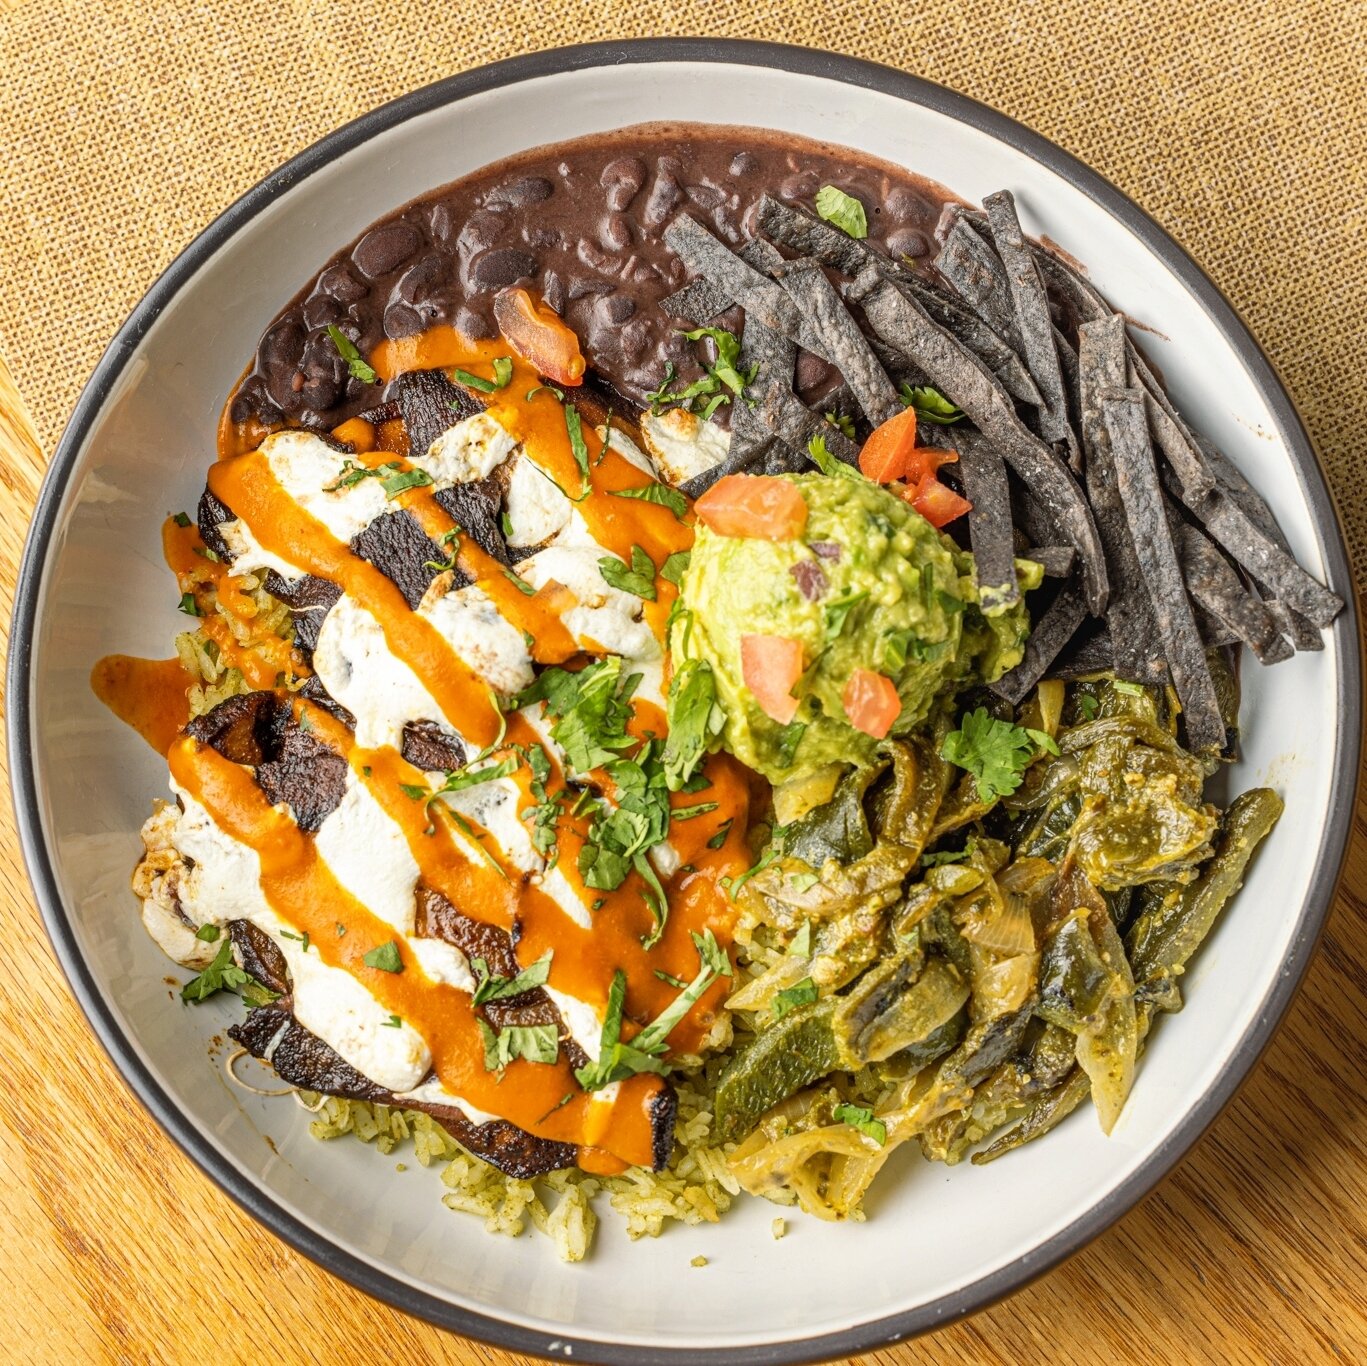 Fajita bowl o'clock. ⏰⁠
⁠
You worked hard this week - time for a meal that rewards your efforts. 🙌⁠
⁠
Stop by, or order online. ⁠
⁠